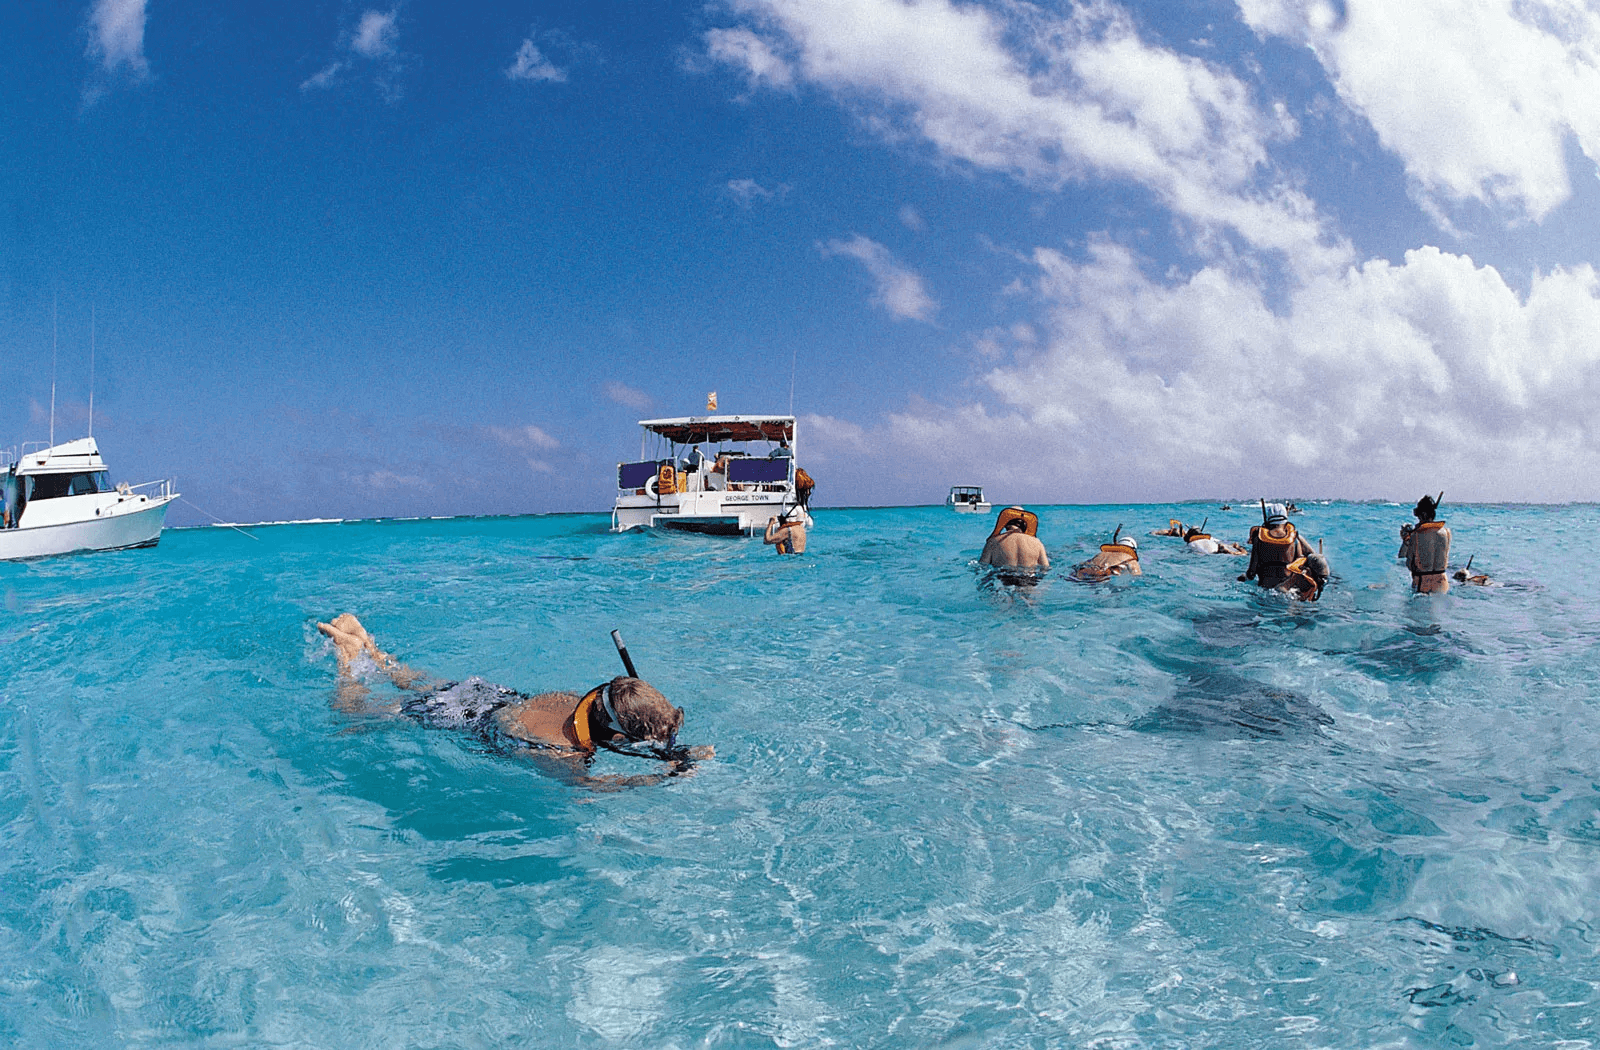 Best Time to Visit Cayman Islands